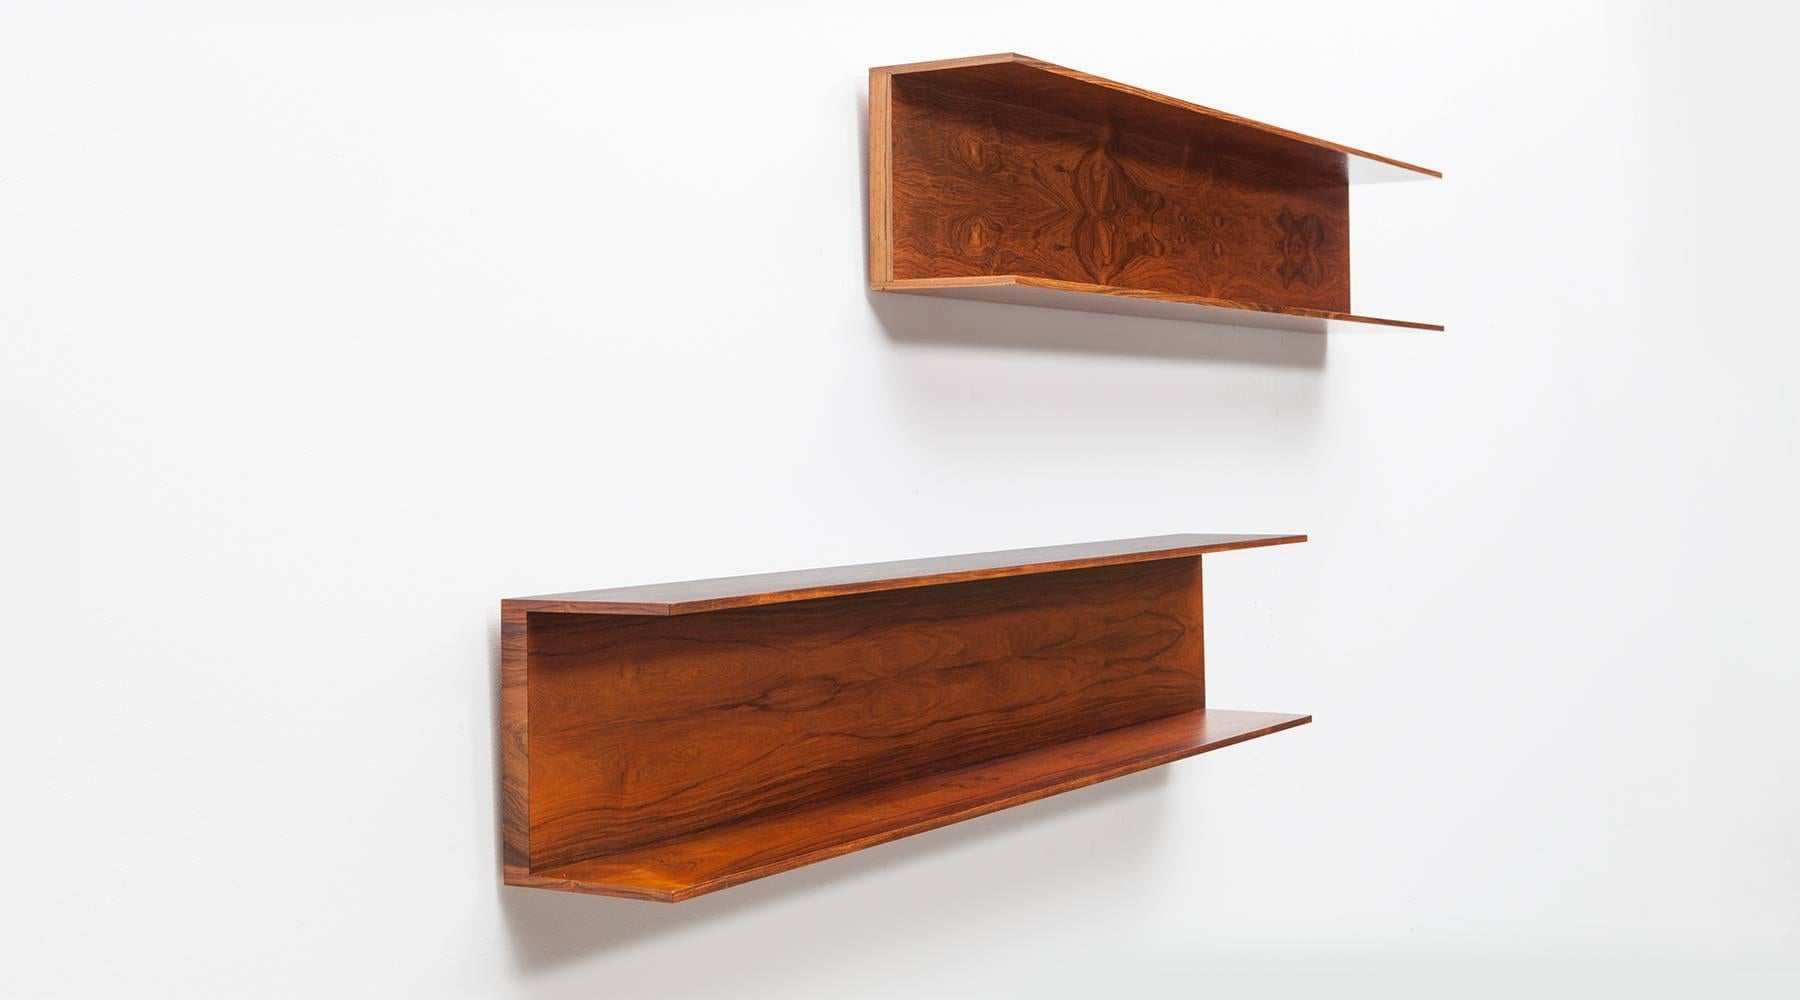 Set of two wall shelves designed by Walter Wirtz in wood. U-shaped structure in minimalistic German design from the early 1960s. The shelves are reworked and comes in very good condition. Manufactured by Wilhelm Renz.